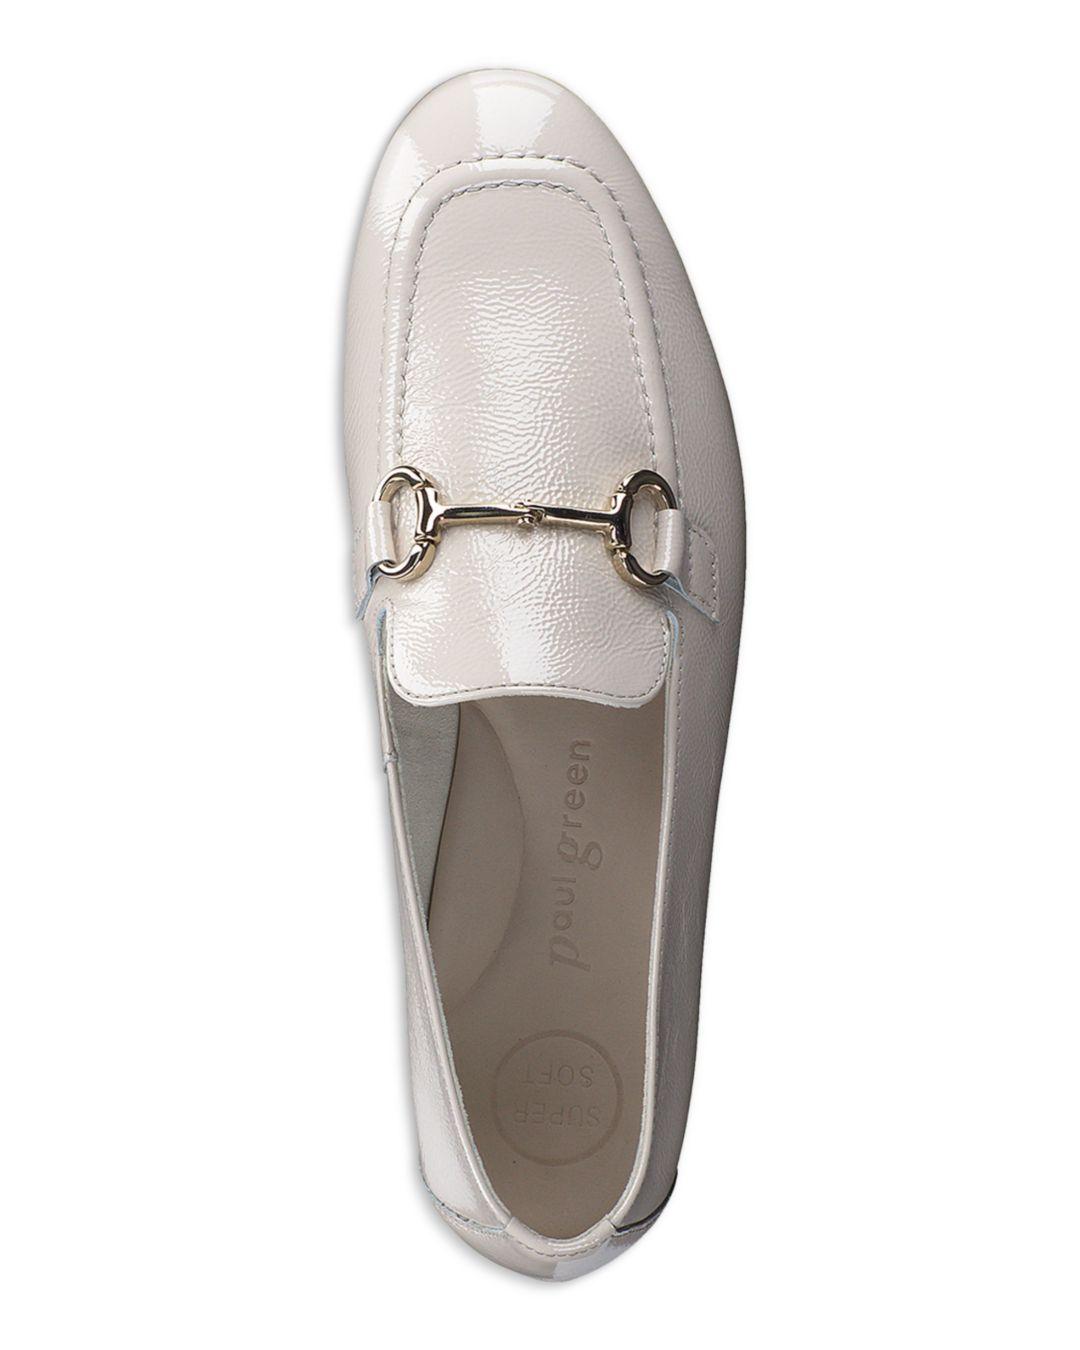 Paul Green Daphne Apron Toe Loafers in Gray | Lyst